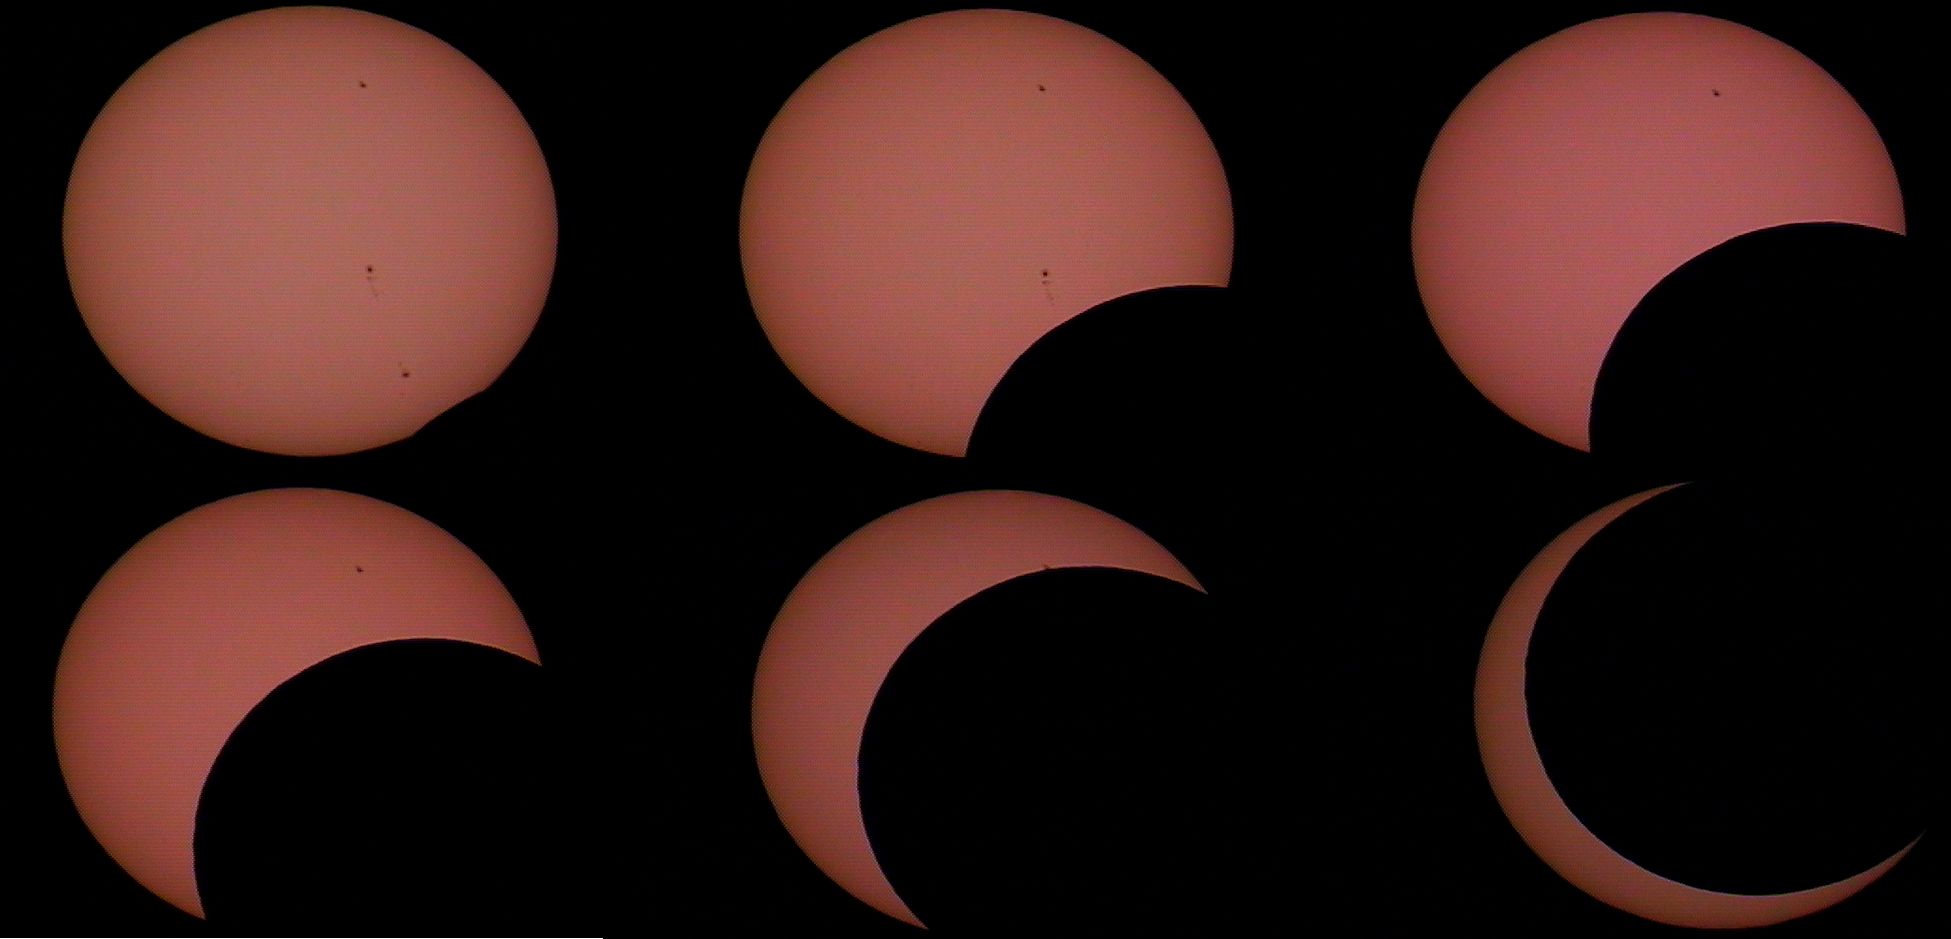 Annular Solar Eclipse Sequence at Orion Store